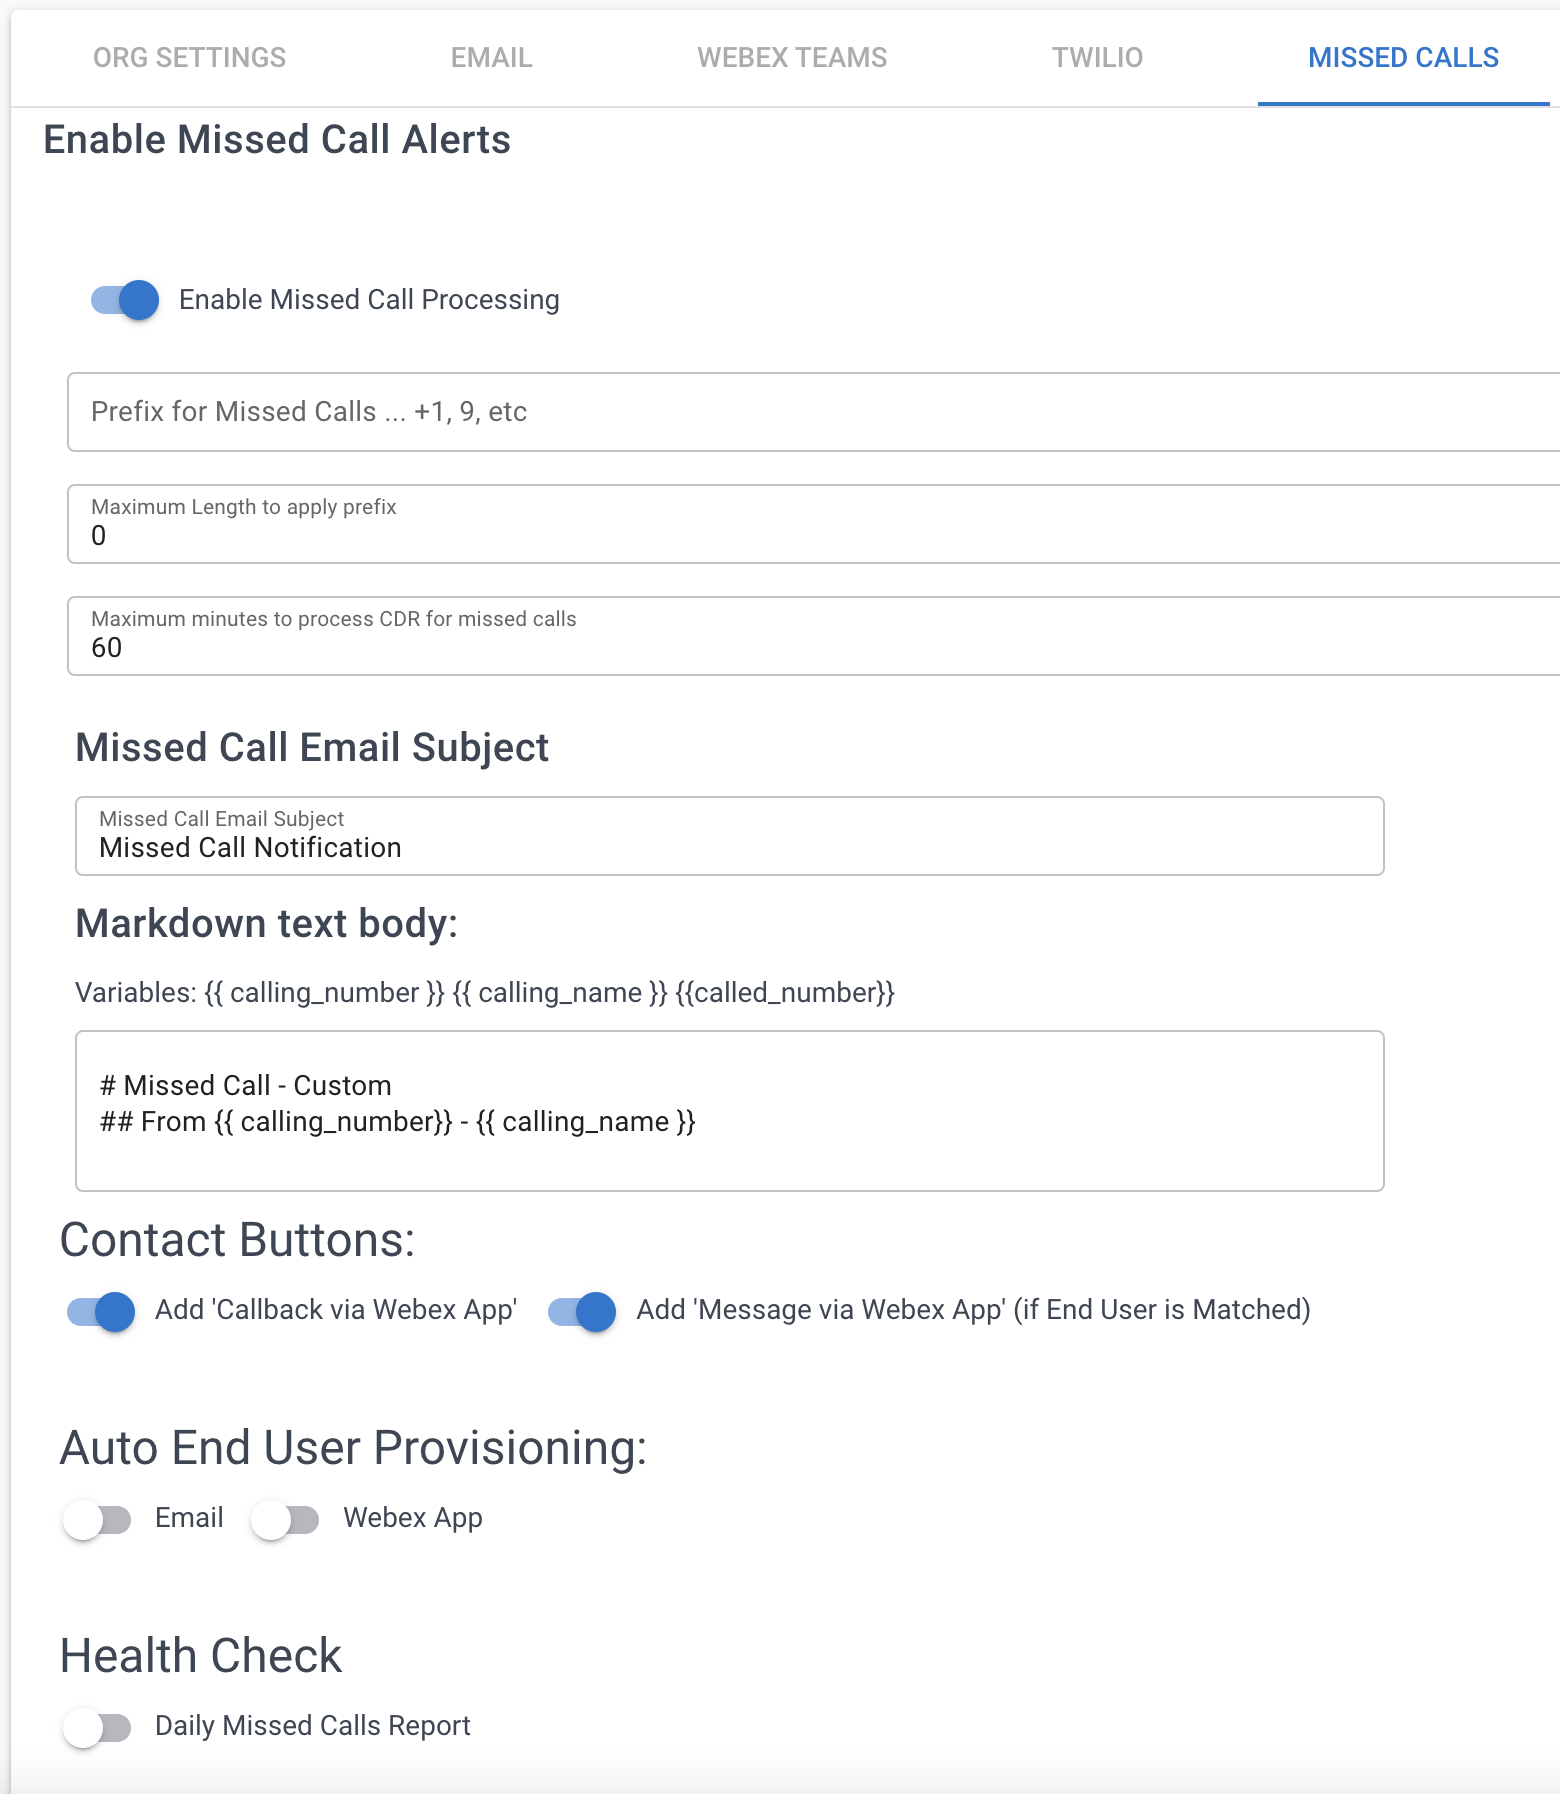 Settings for Missed Call Alerts